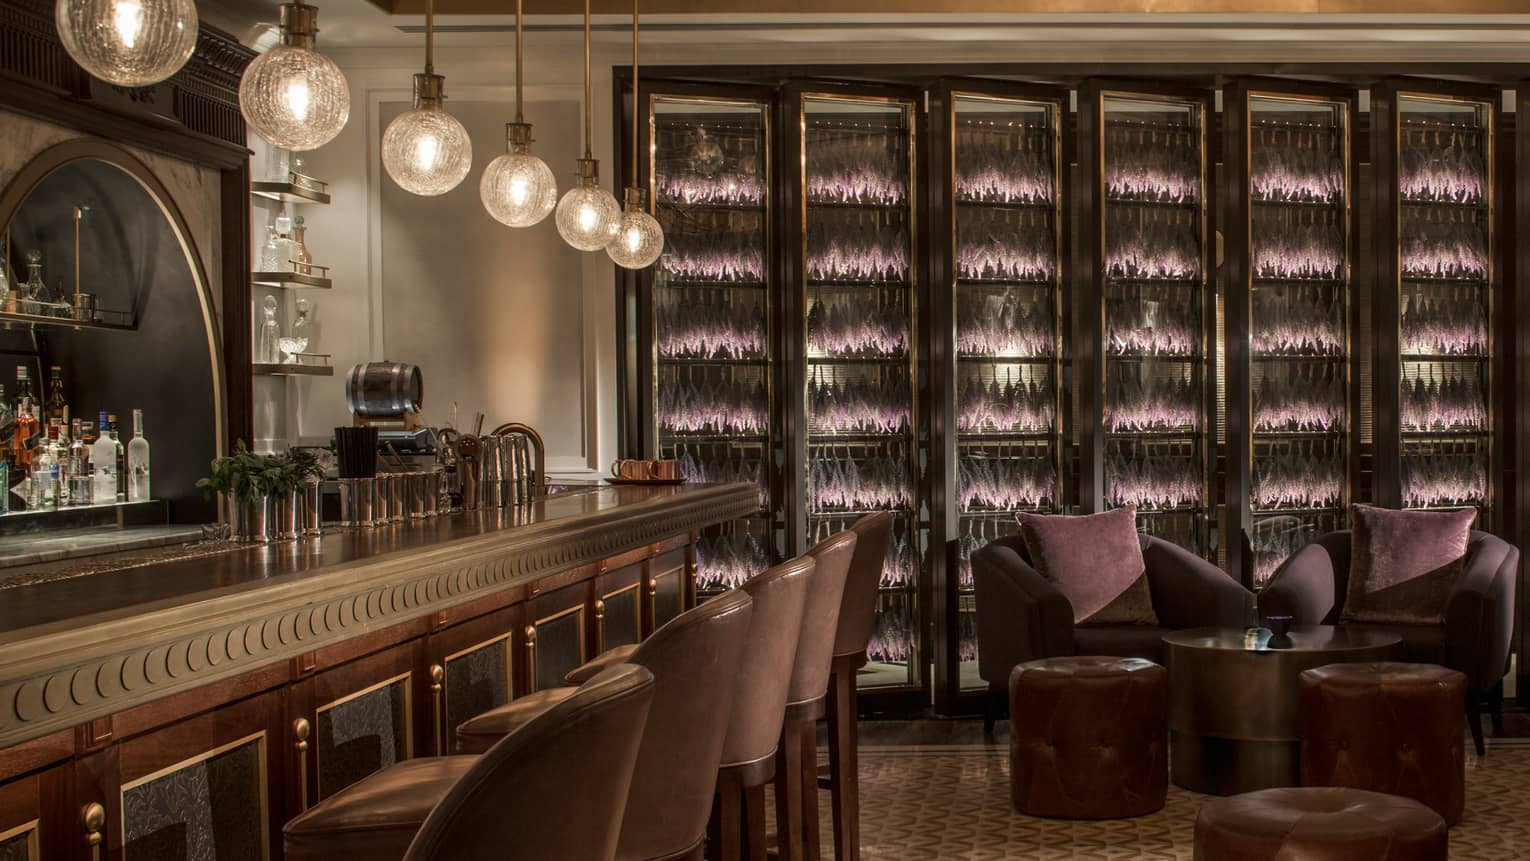 The bar at La Capitale with globe lighting, dark wood paneling, brown leather chairs and purple accents